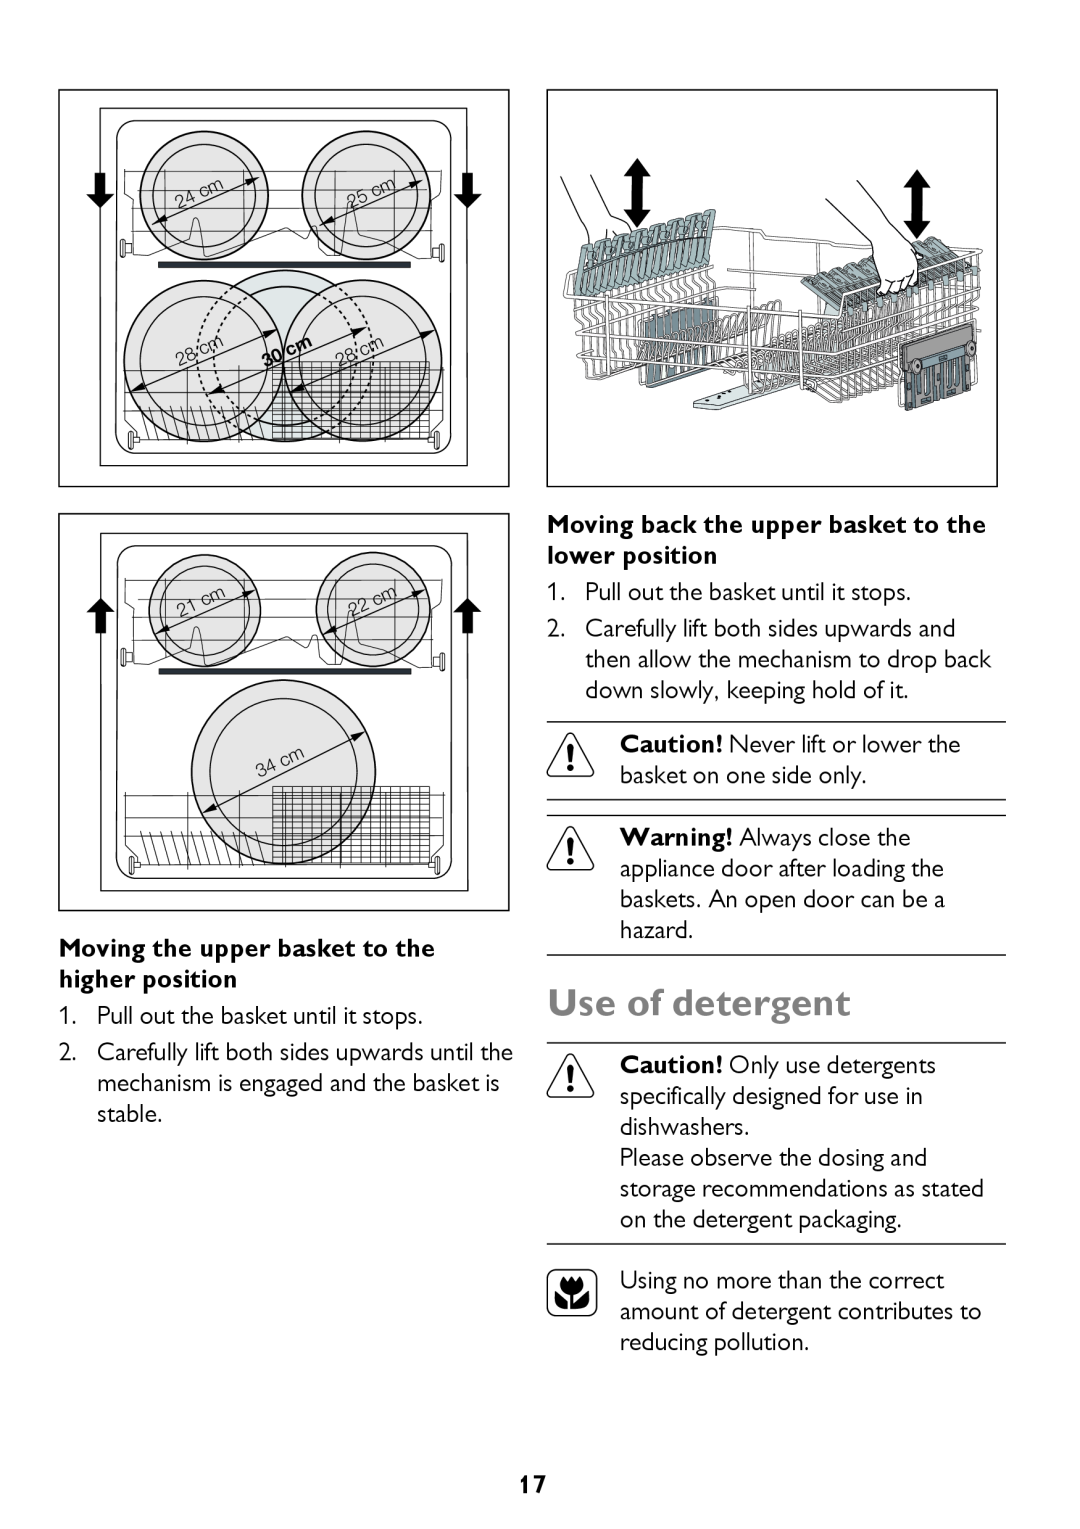 John Lewis JLDW 1221 instruction manual Use of detergent, Moving the upper basket to the higher position 